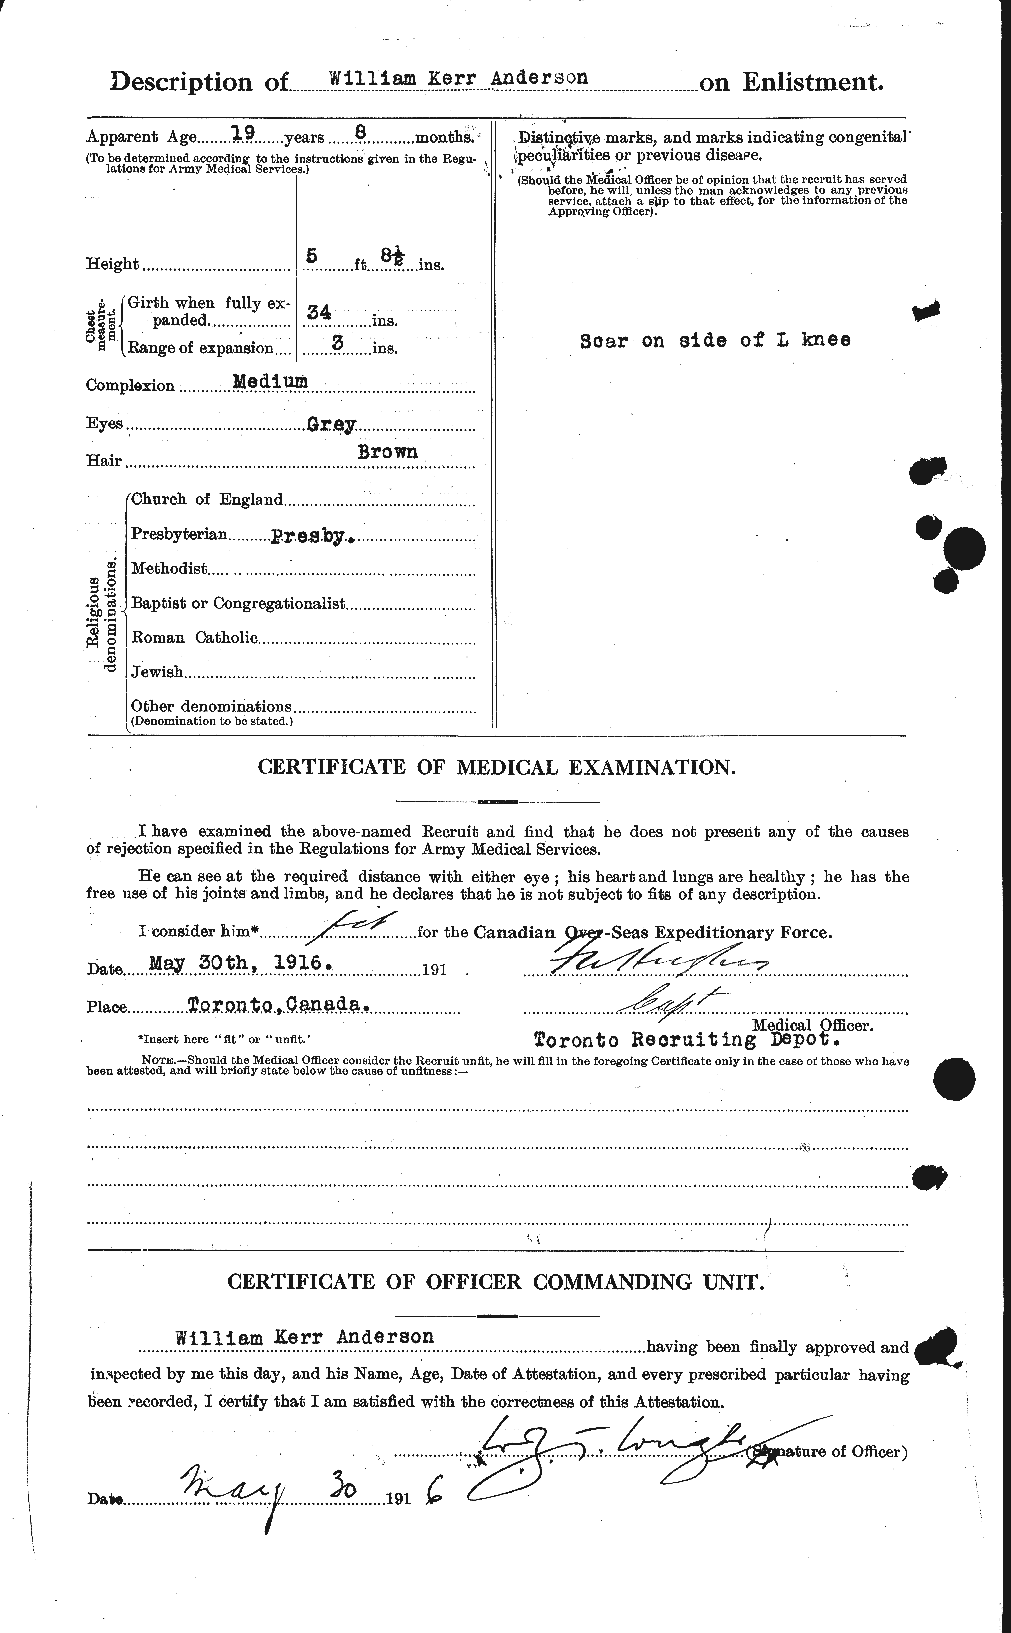 Personnel Records of the First World War - CEF 210689b